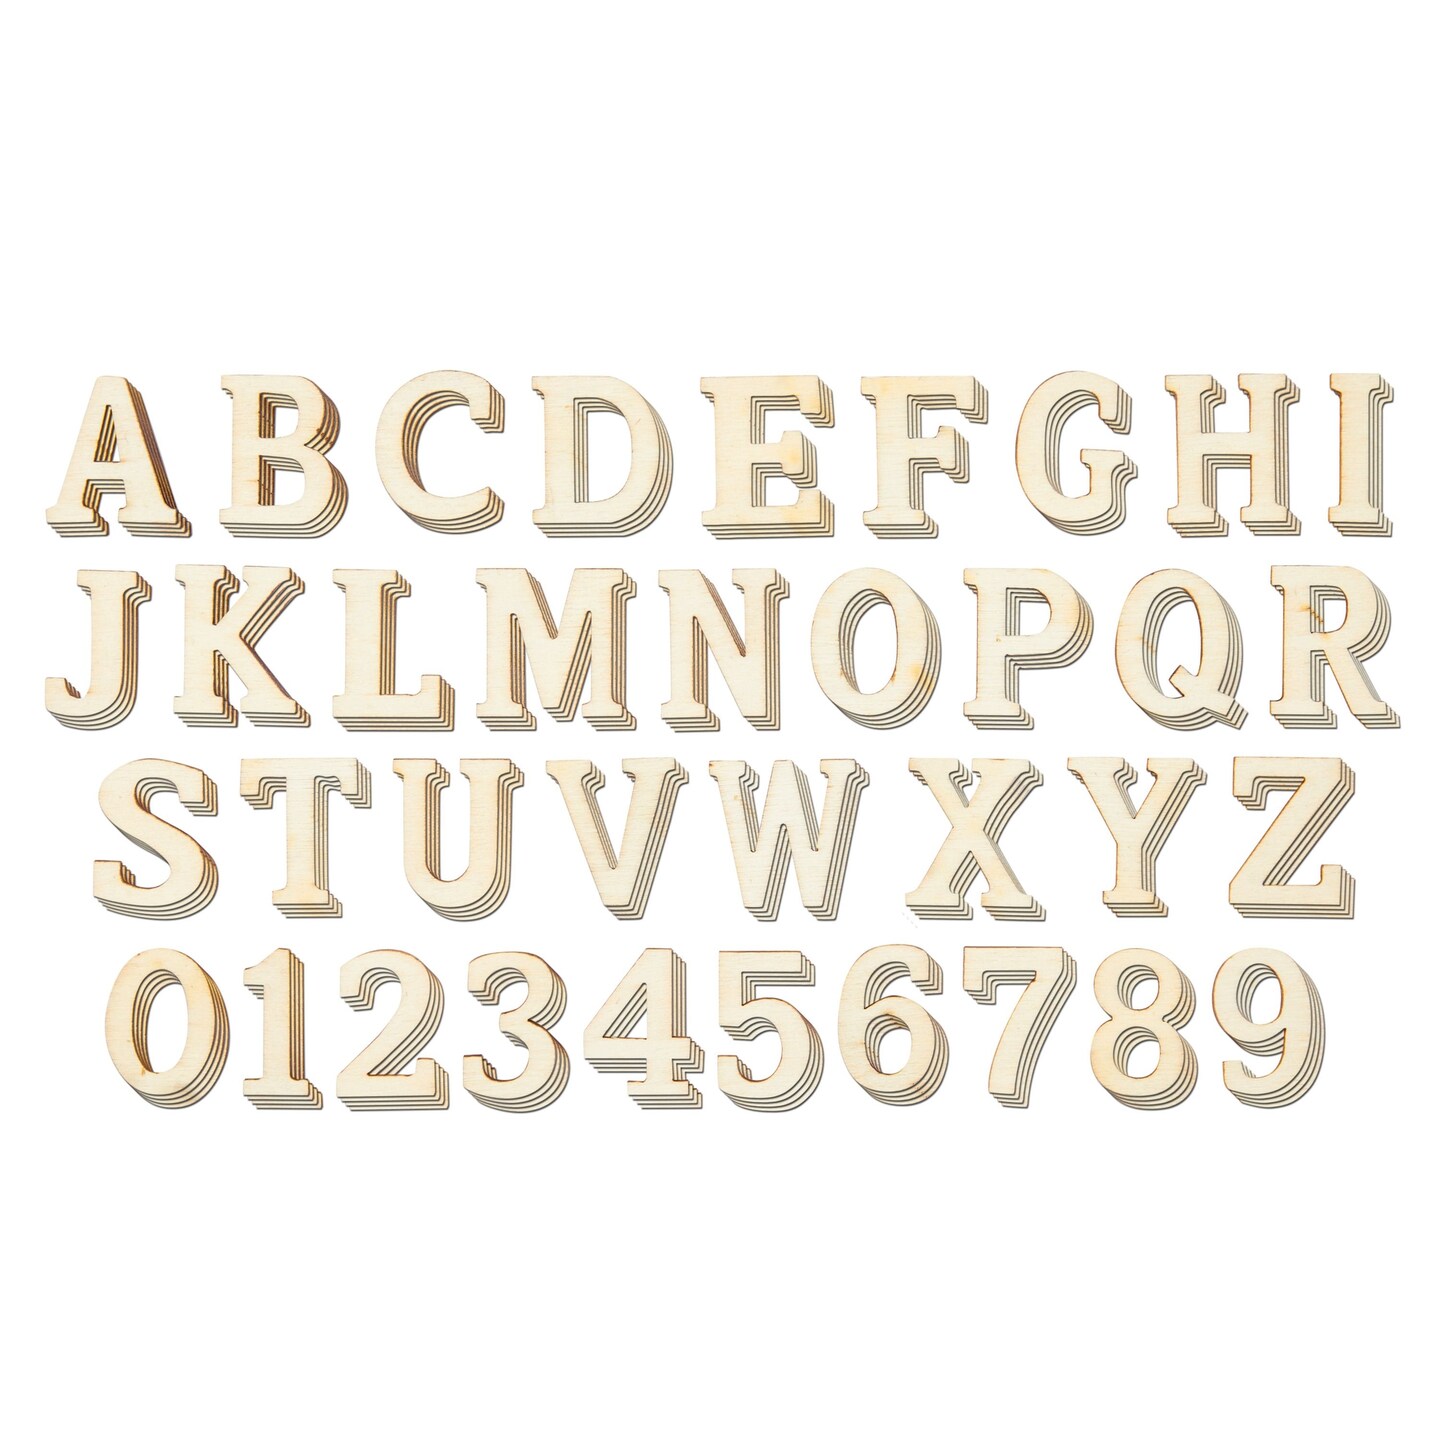  PandaHall 112pcs 1.5 Inch Wooden Letters A~Z Heart Set- Small  Wooden Capital Letters with Storage Tray - Wooden Alphabet Craft Letters  Smooth Natural Wooden for Arts Crafts DIY Wedding Display Decor